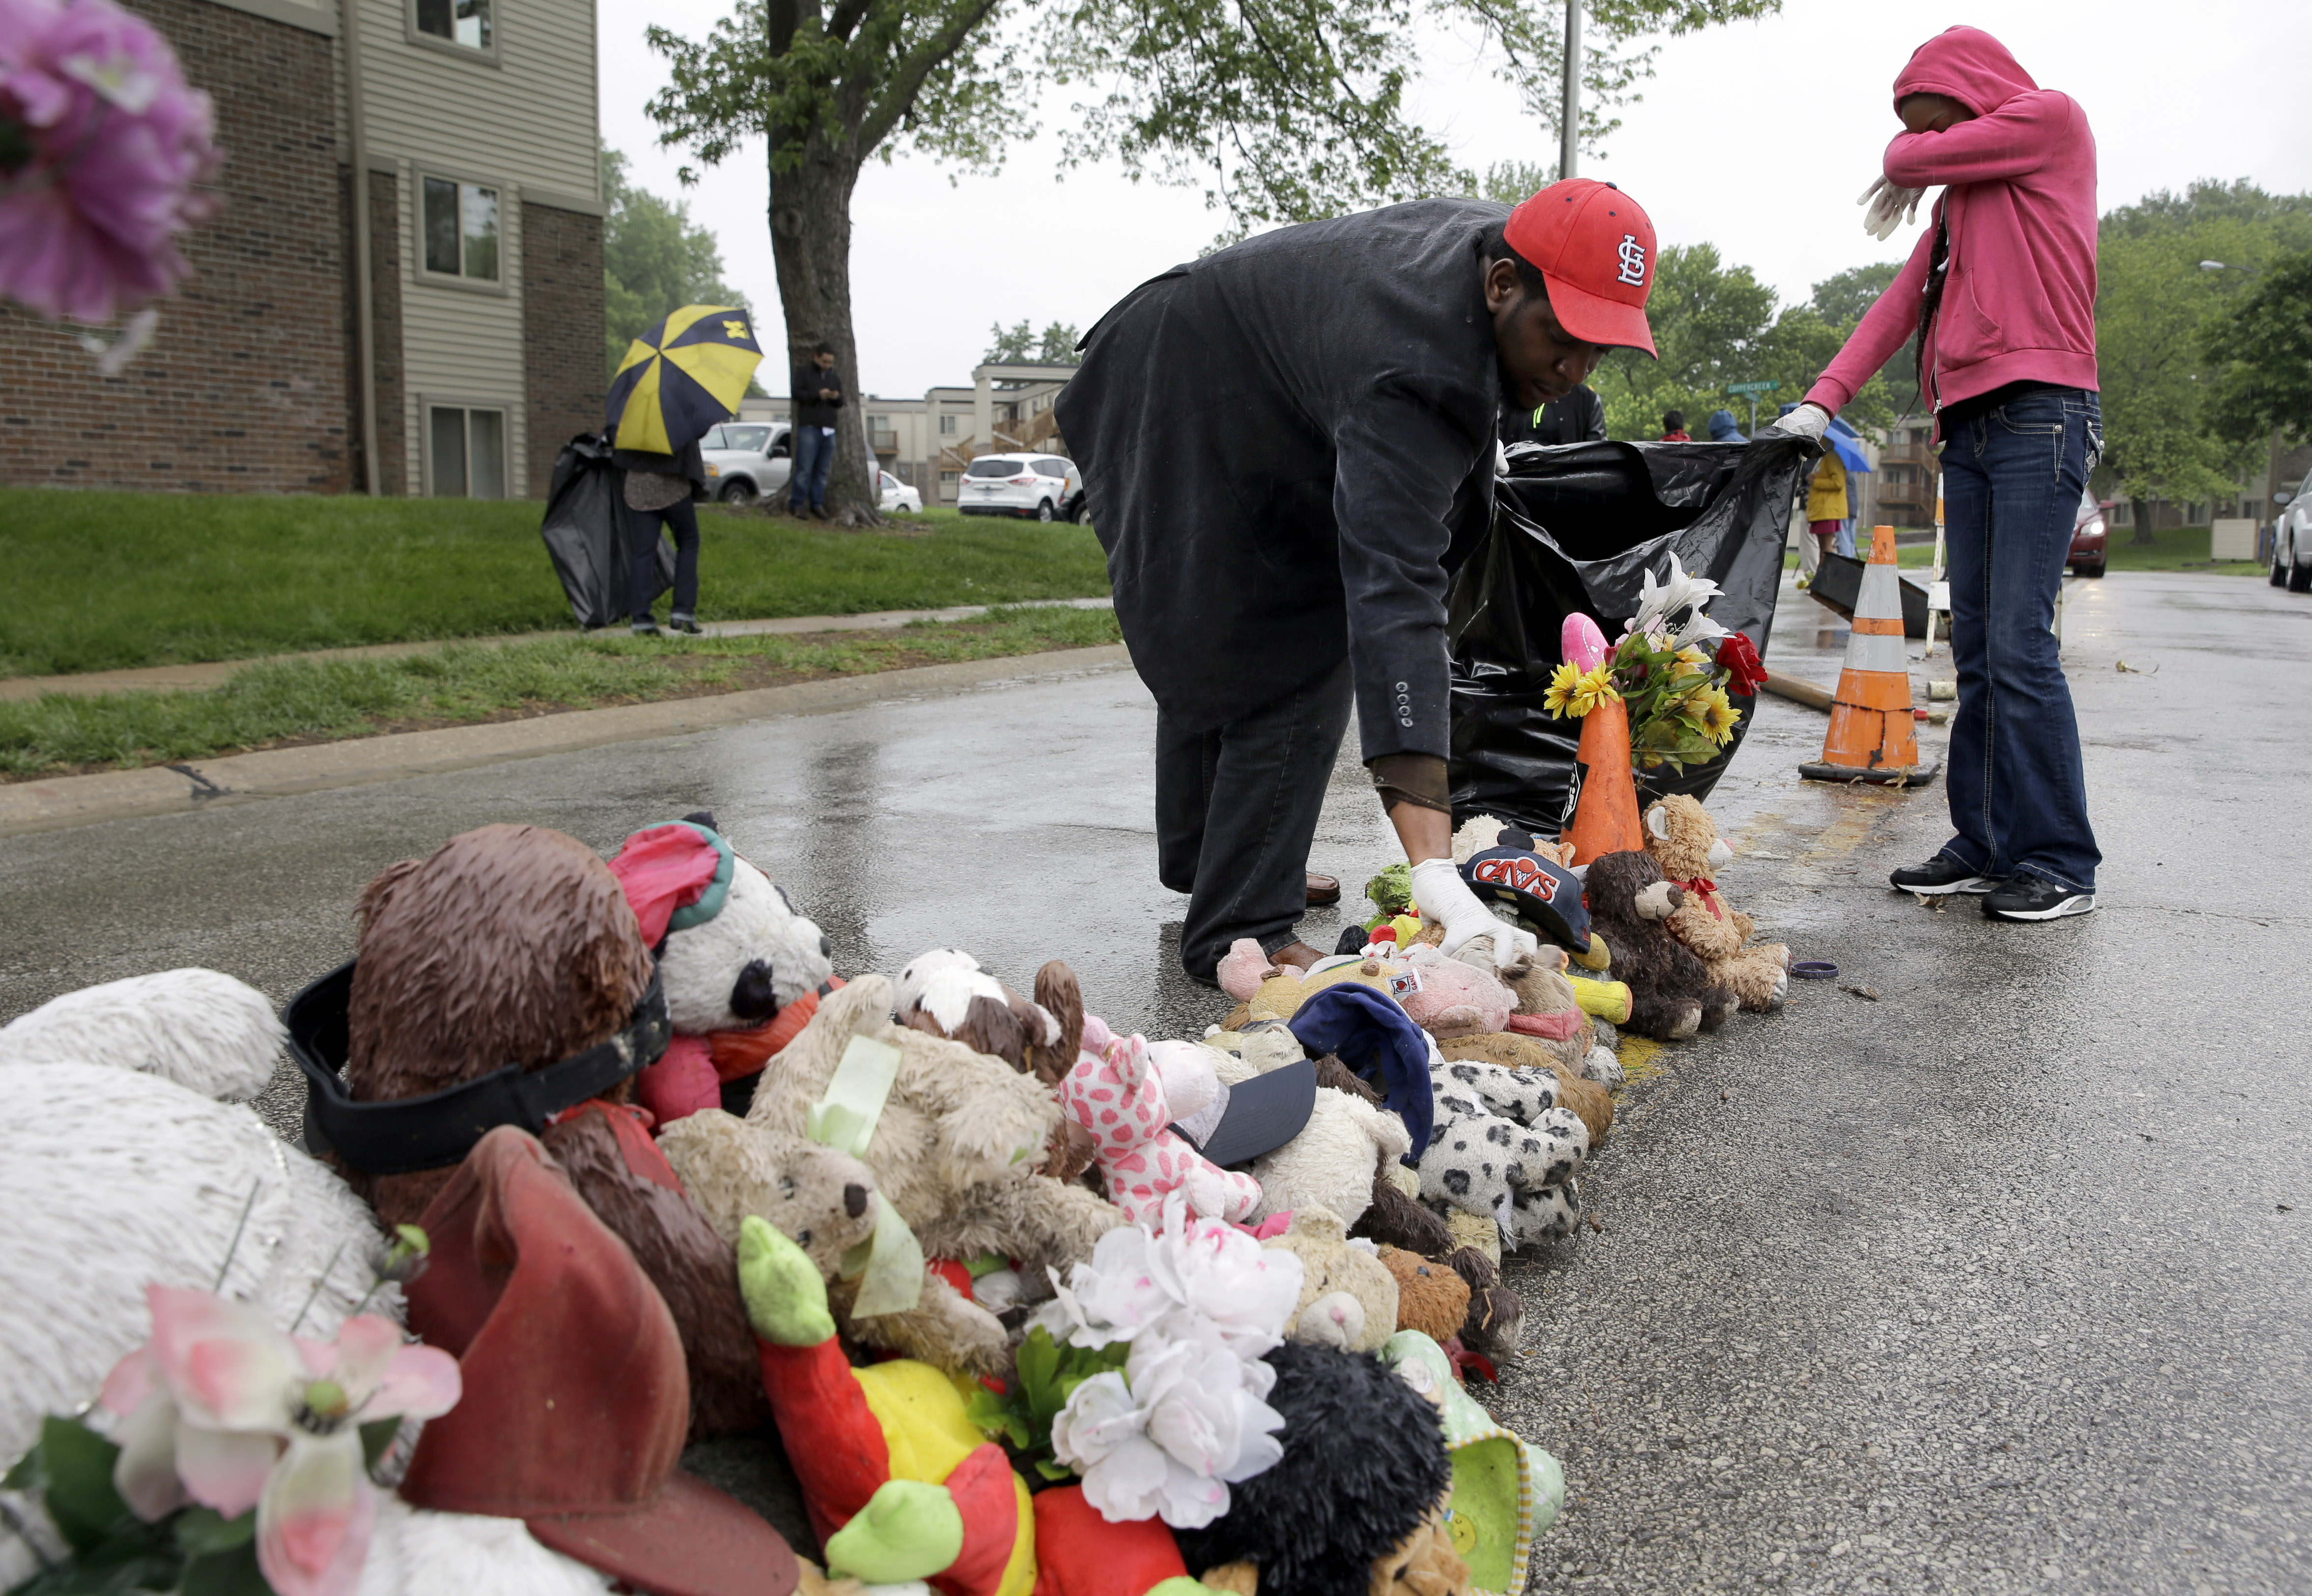 Volunteers Cheyenne Green, right, and Derrick Robinson help remove items left at a makeshift memorial to Michael Brown Wednesday, May 20, 2015, in Ferguson, Mo. (Jeff Roberson—AP)